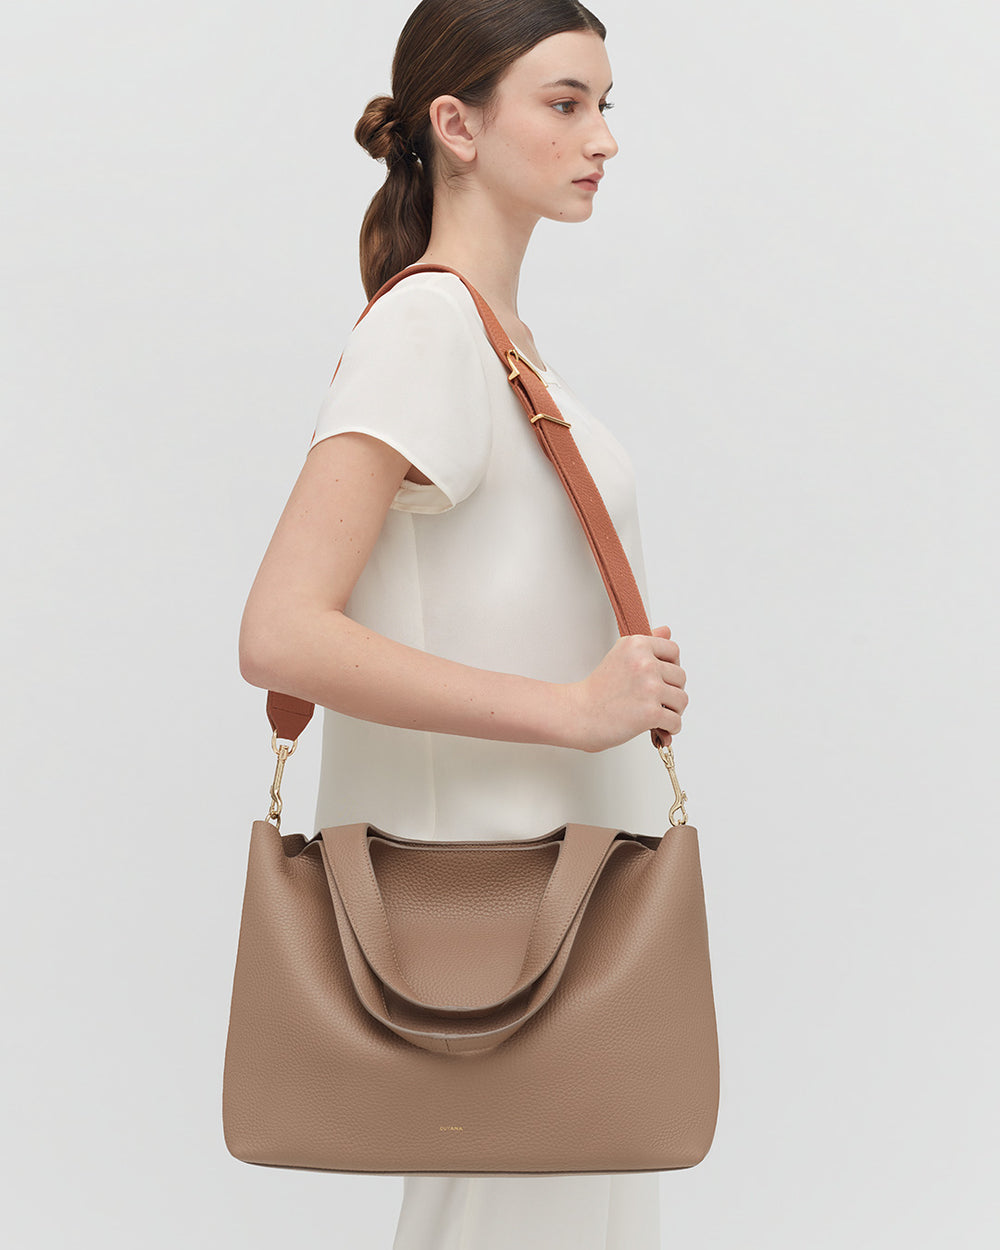 Woman standing sideways carrying a large shoulder bag.